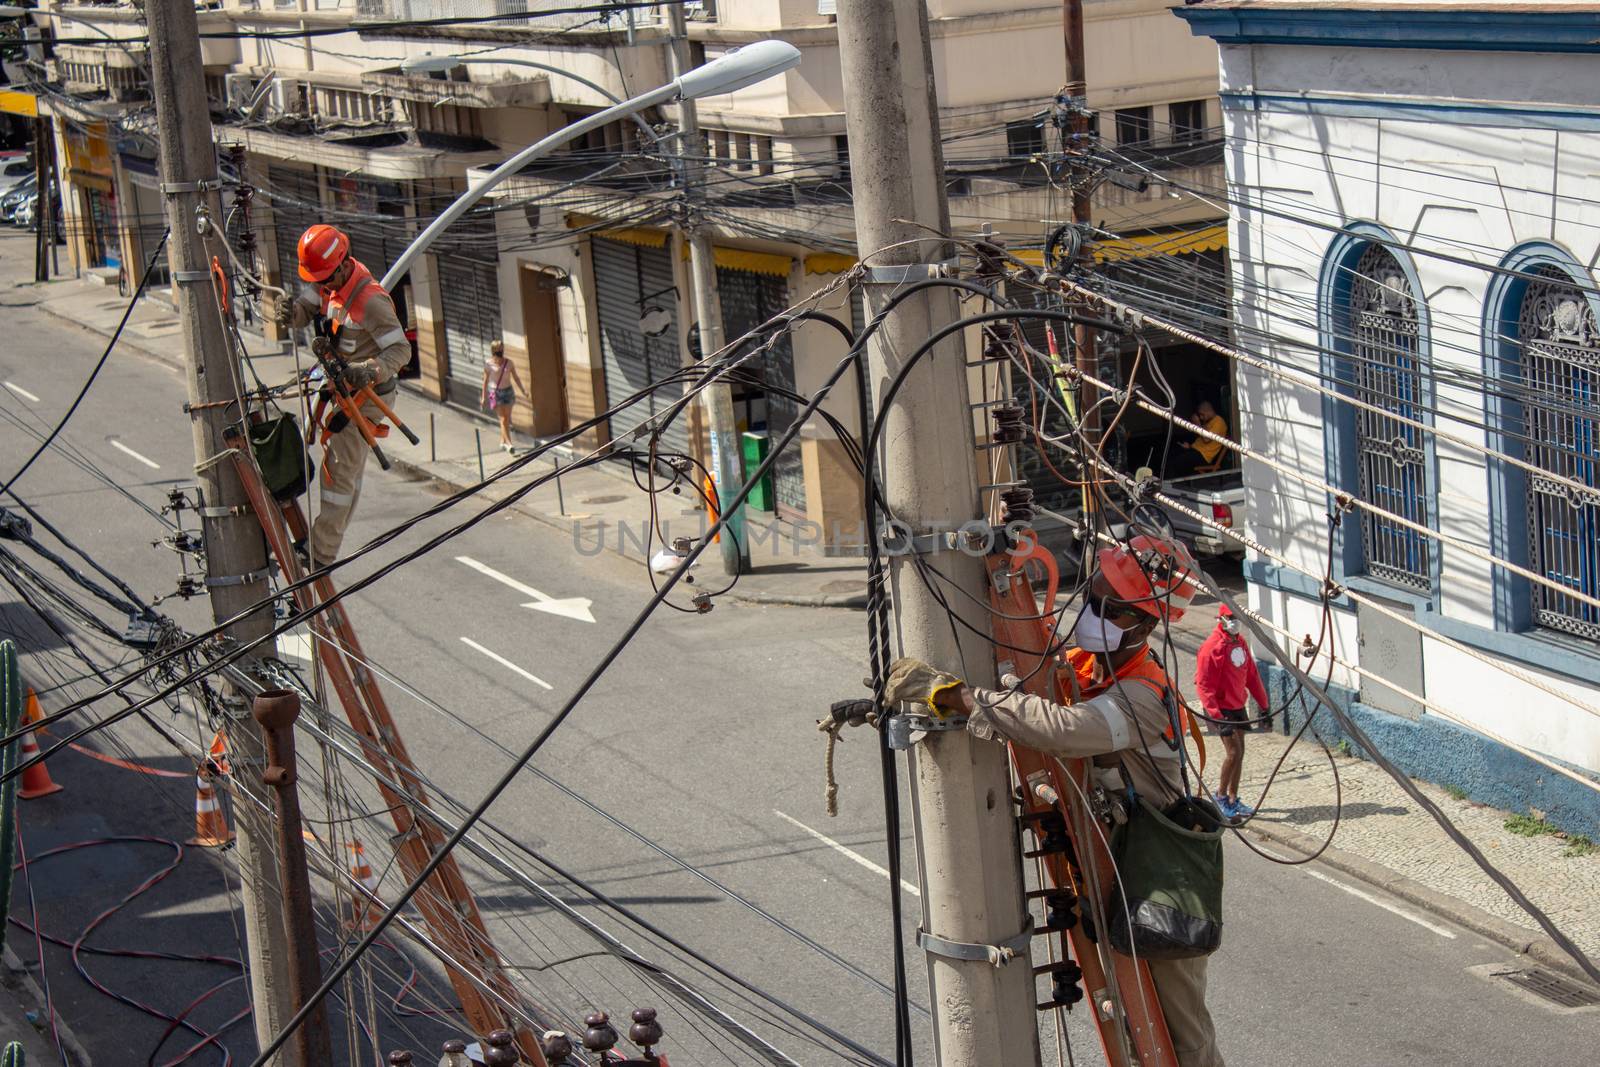 Men repairing electrical grid wires using masks because of COVID-19 by etcho